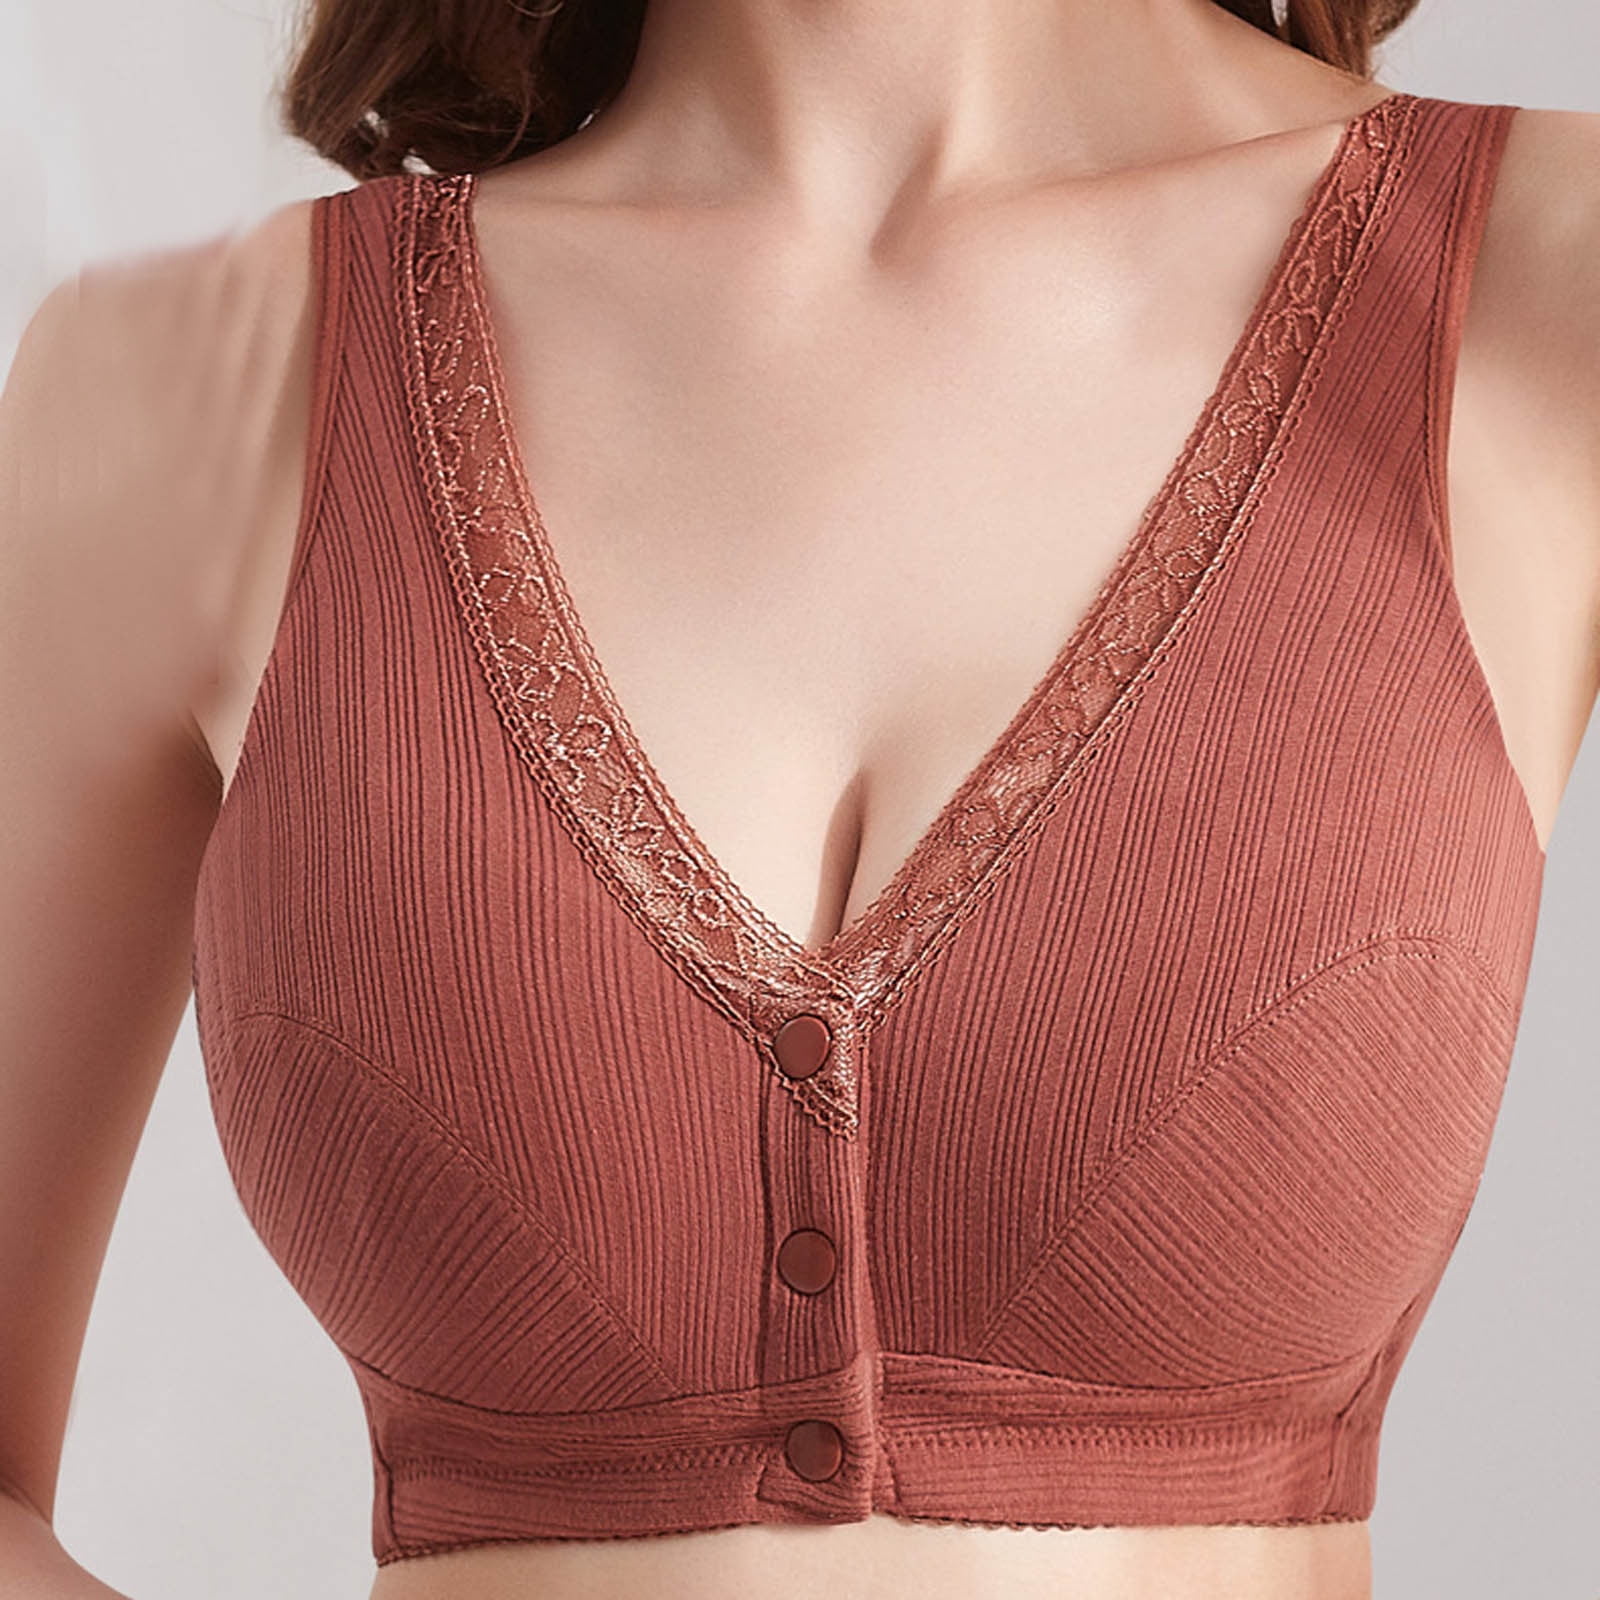 Raeneomay Bras for Women Deals Clearance Bra Without Steel Rings